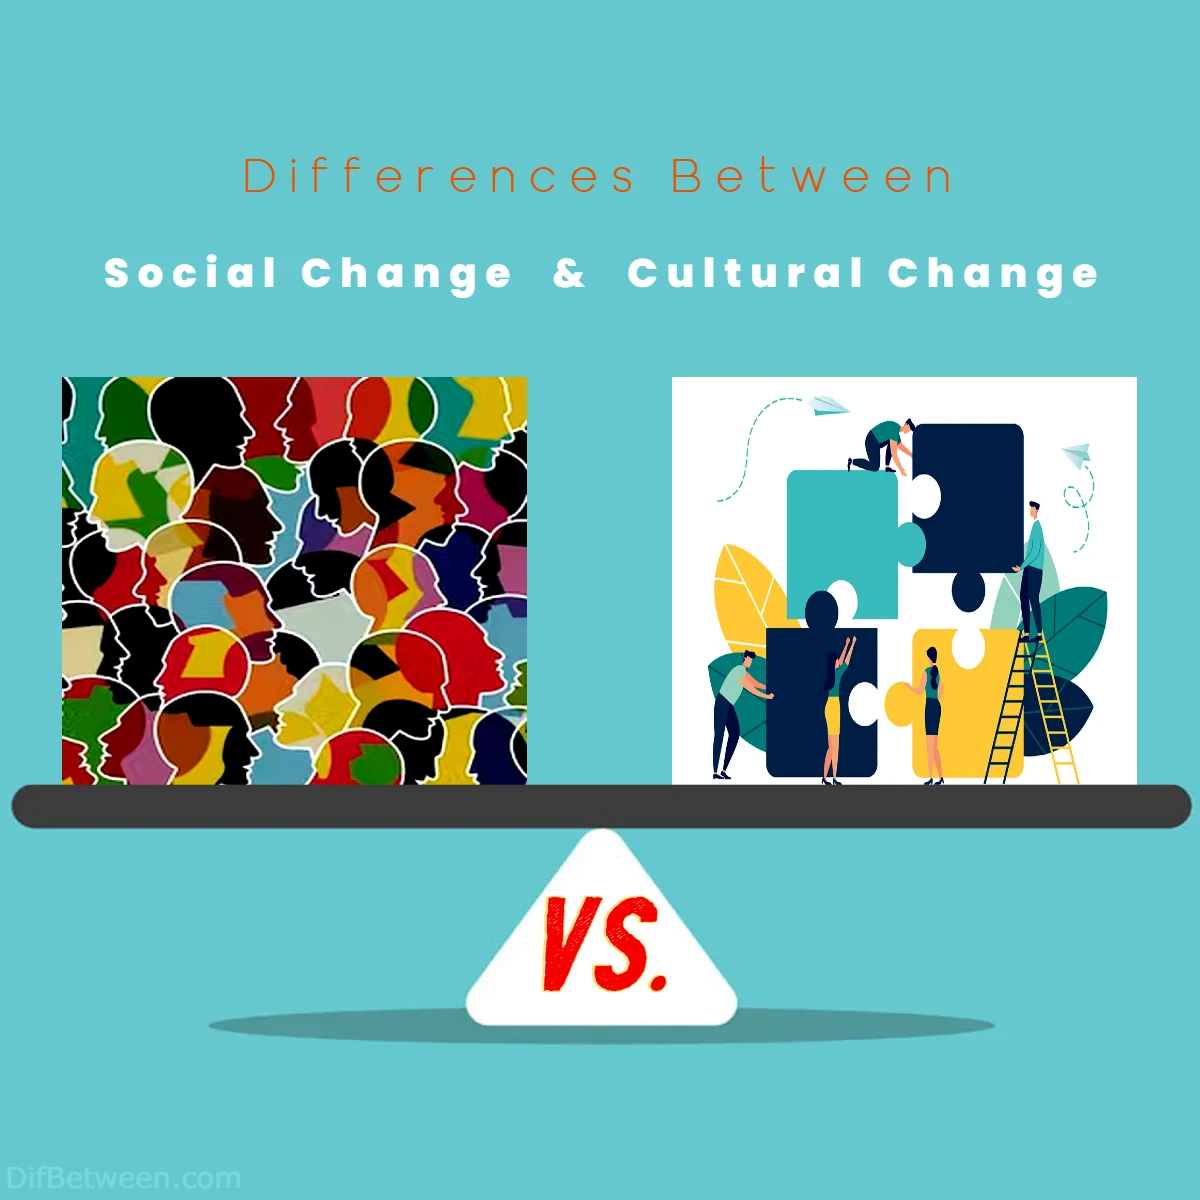 Differences Between Social Change vs Cultural Change